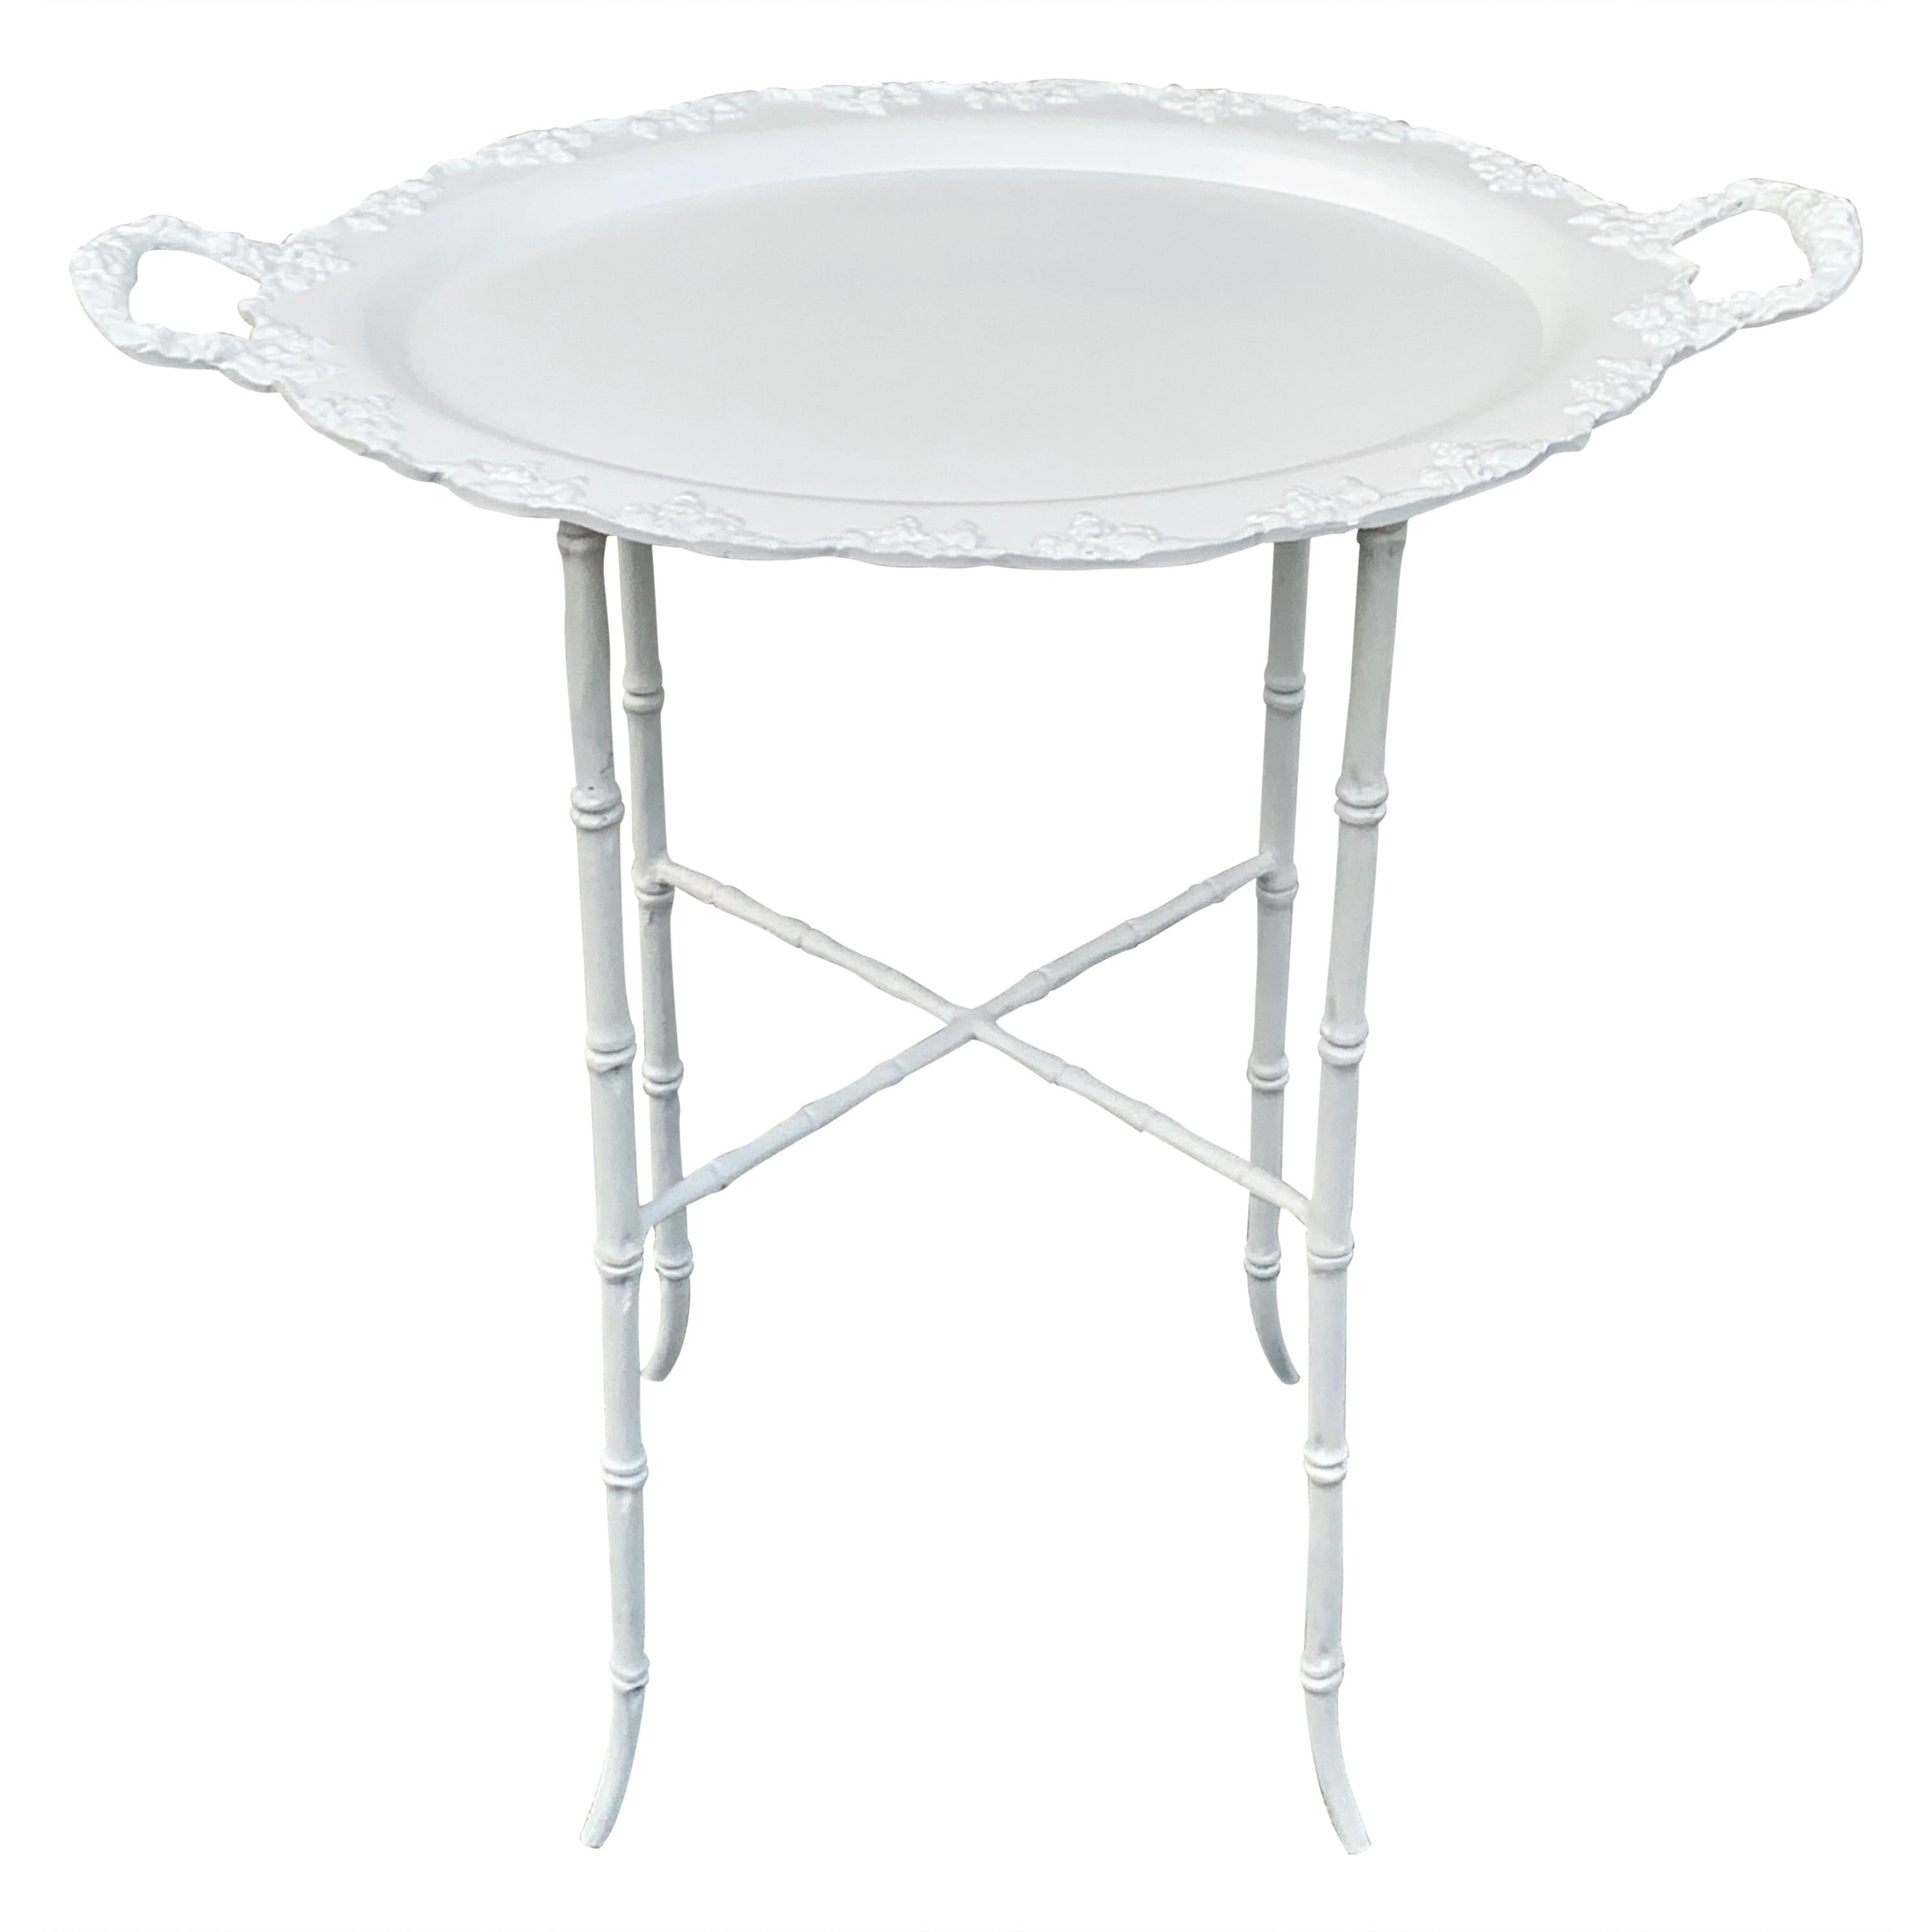 Faux Bamboo and Grape Motif White Enameled Tray Table, Provenance Celine Dion